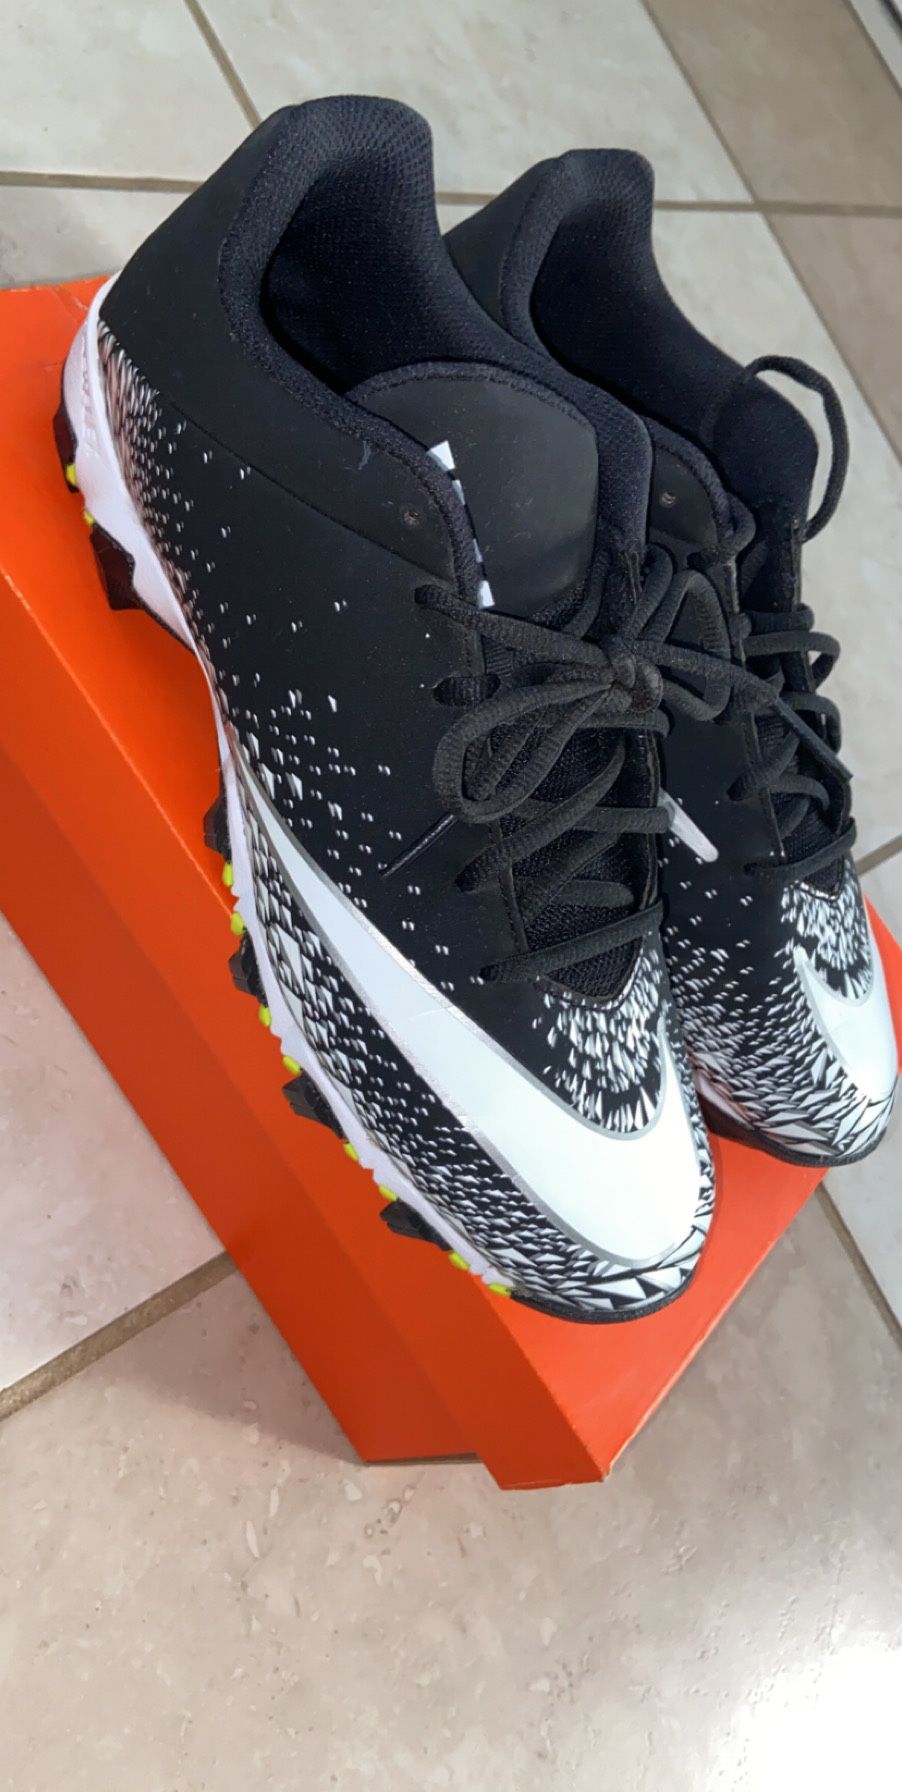 Nike Vapor Shark 2, mens cleats, shoes size 9.5 for Sale in Victorville, CA - OfferUp